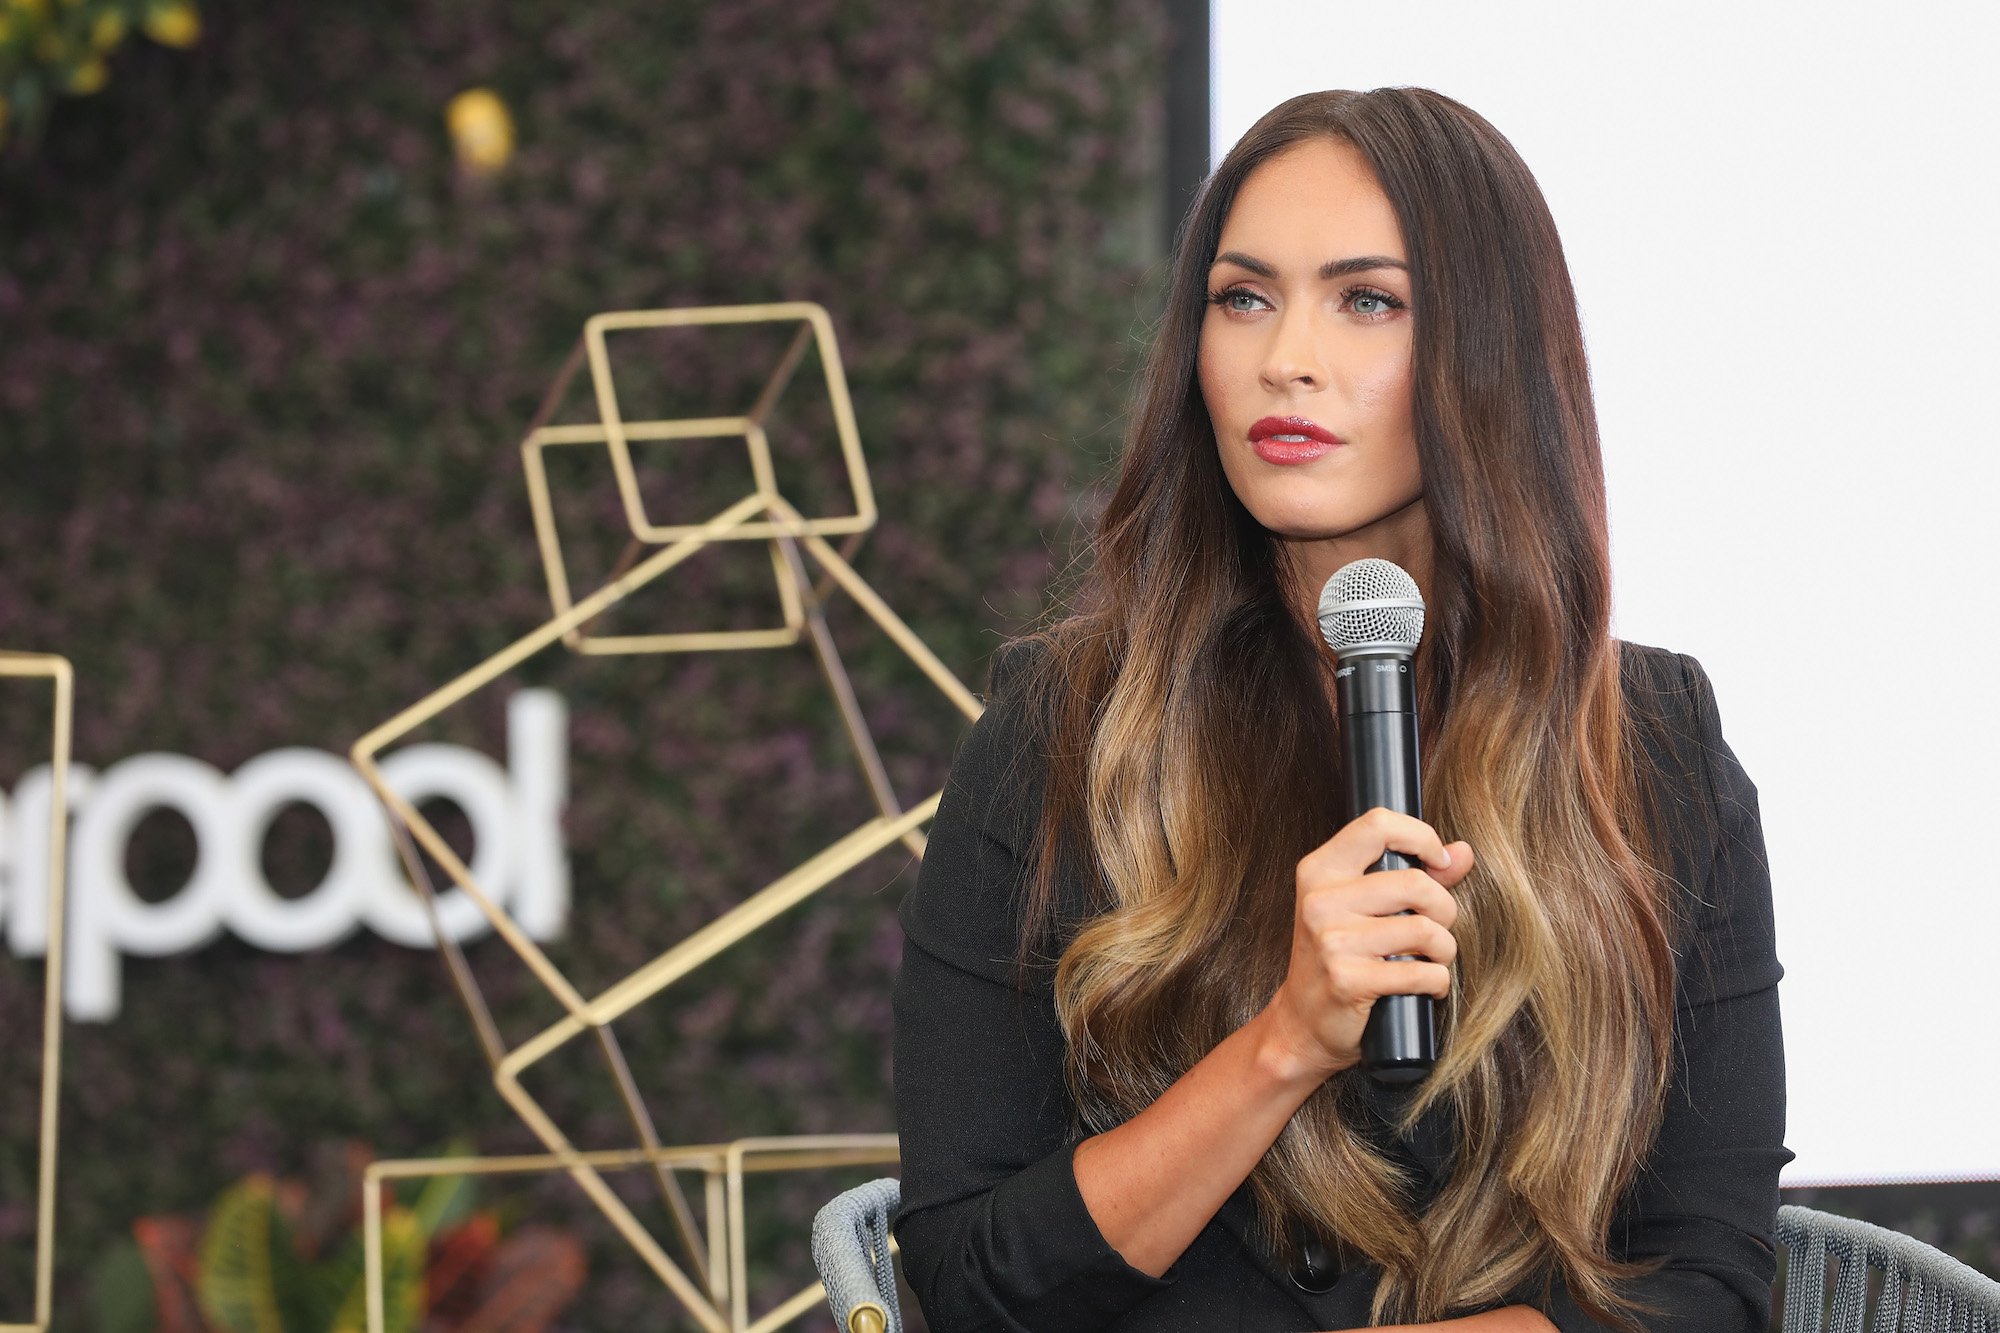 Megan Fox at a press conference during the Liverpool Fashion Fest Autumn/Winter 2017 at Liverpool Insurgentes on September 6, 2017.